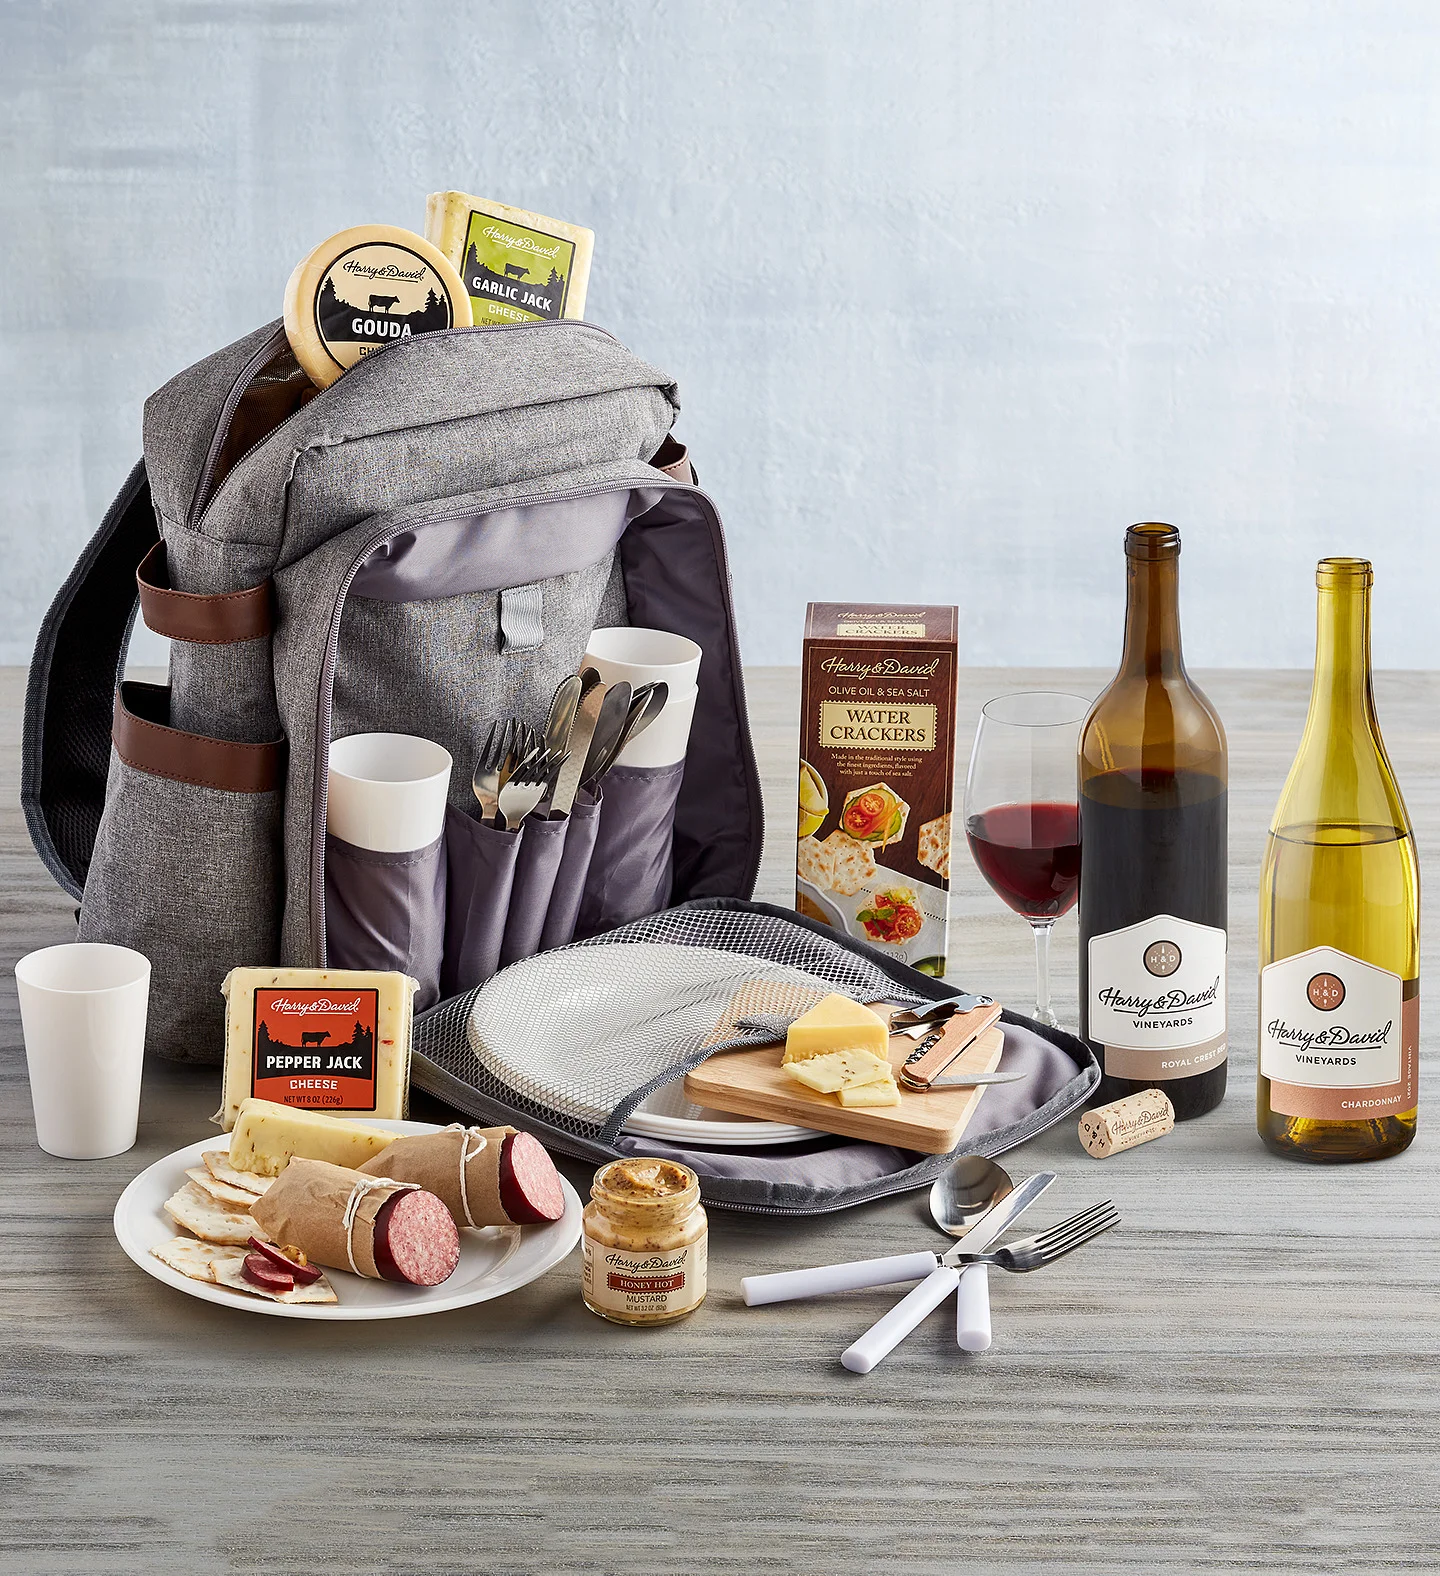 wine gifts for mom backpack picninc gift